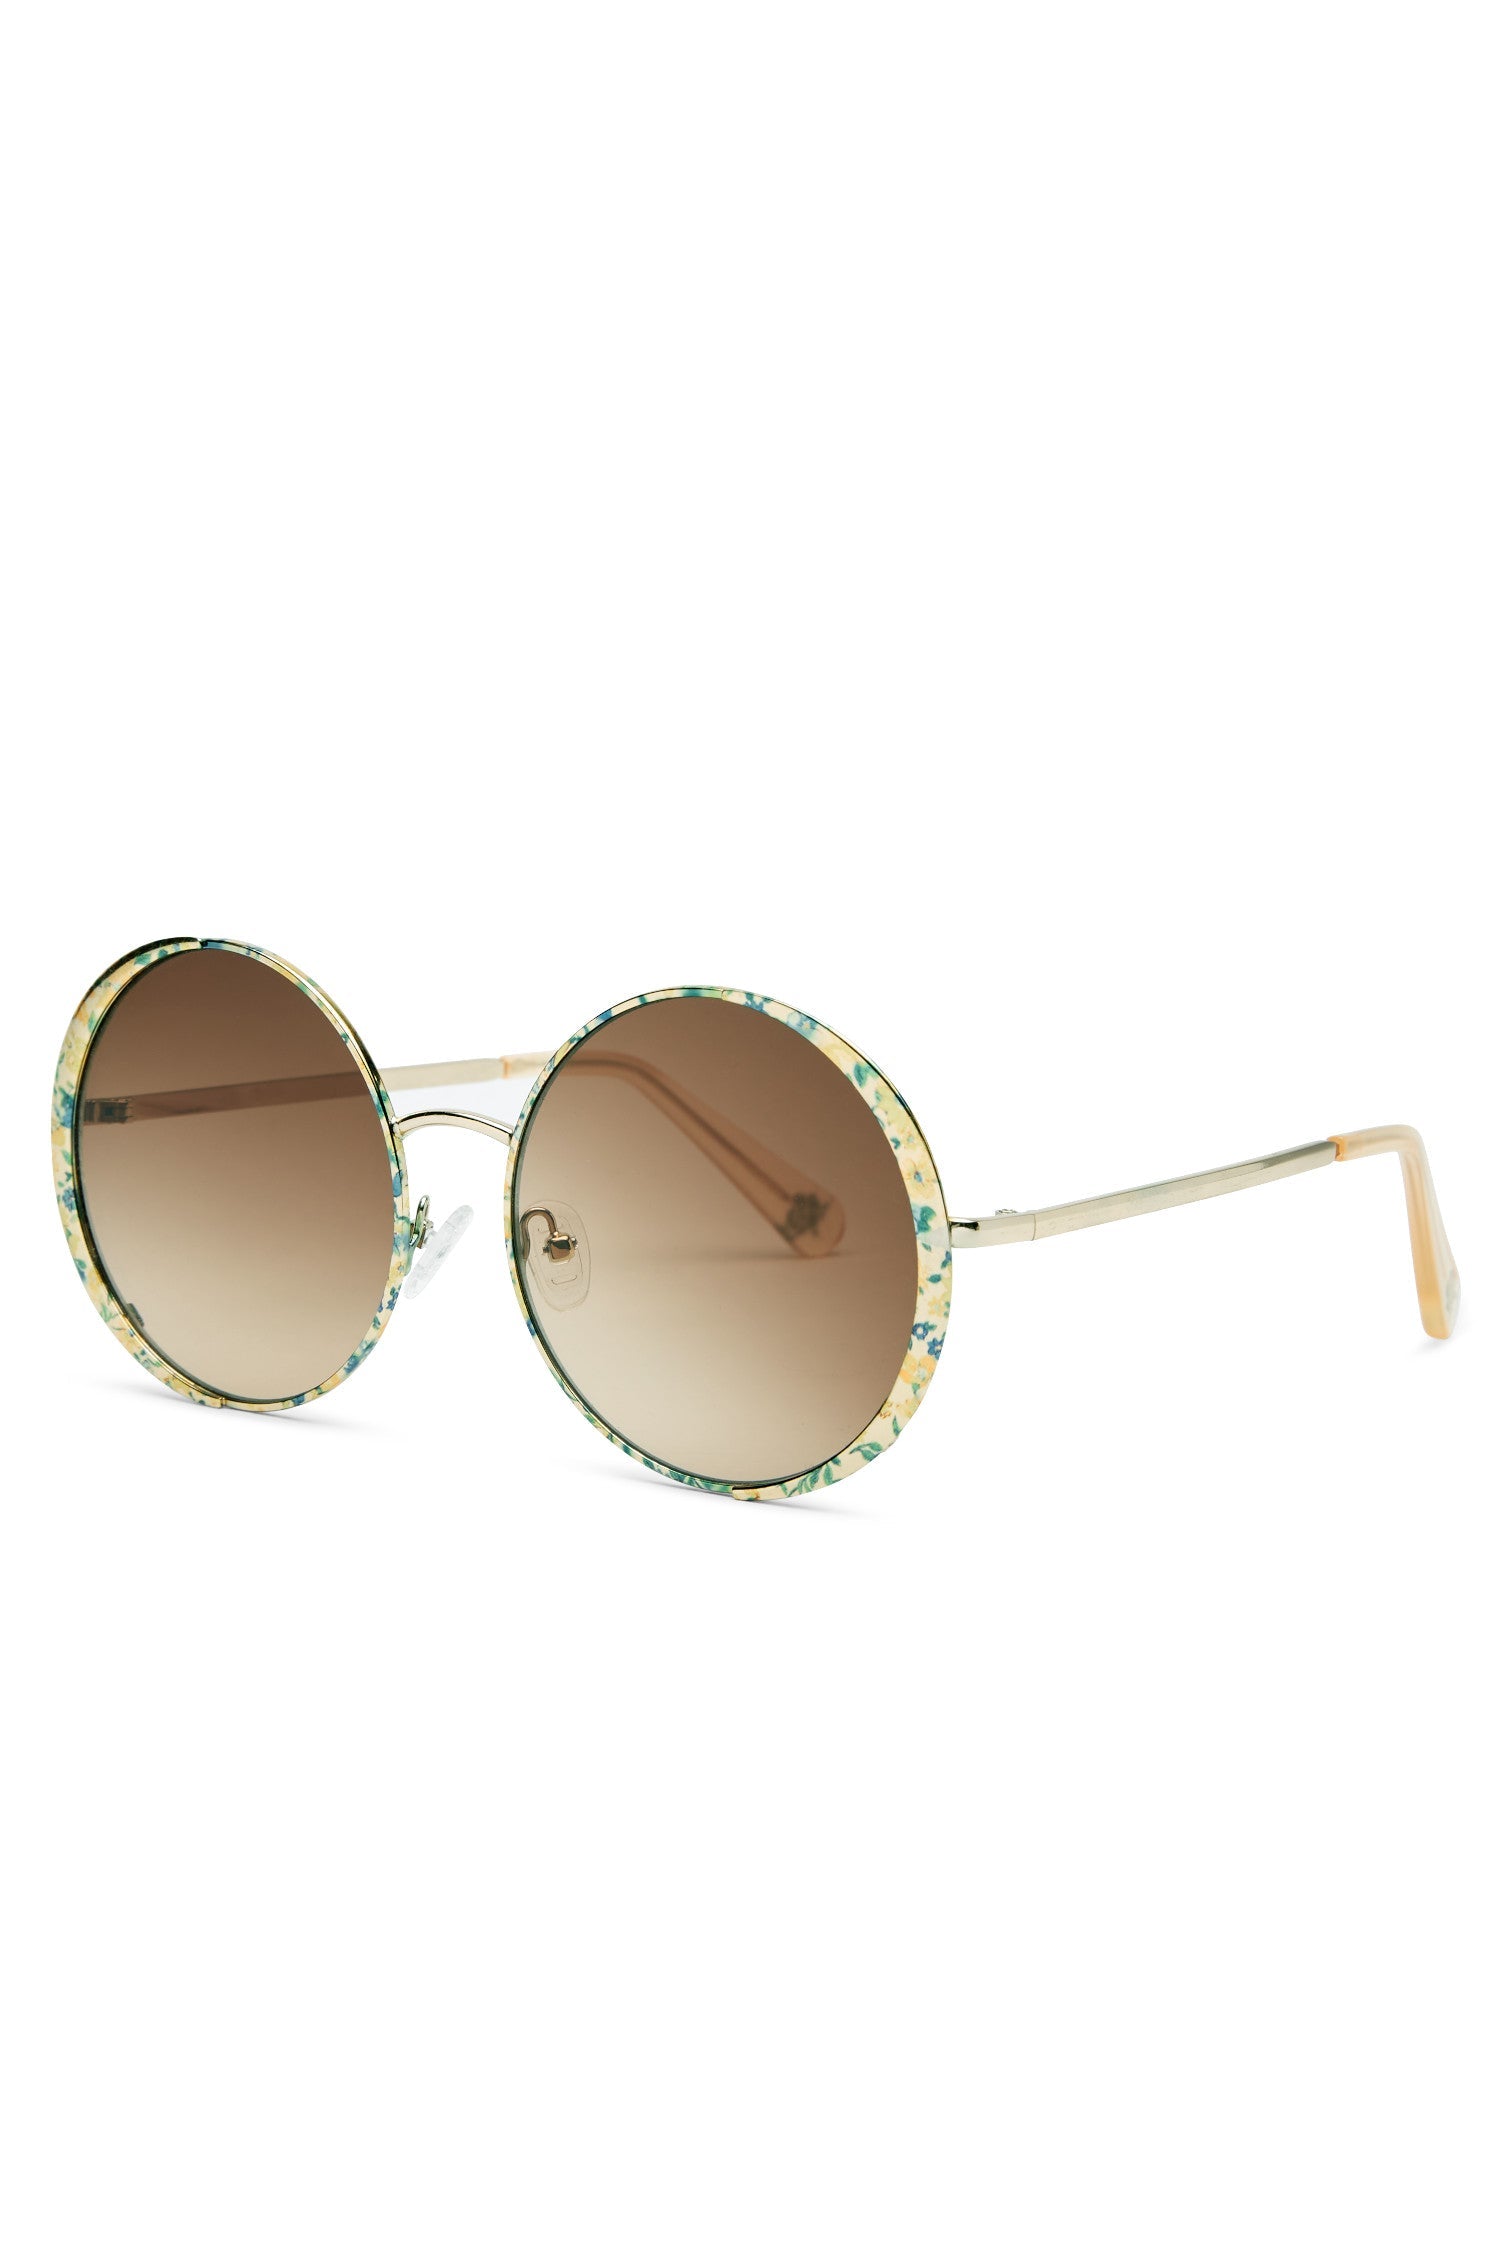 Womens round sunglasses with yellow flower detailing